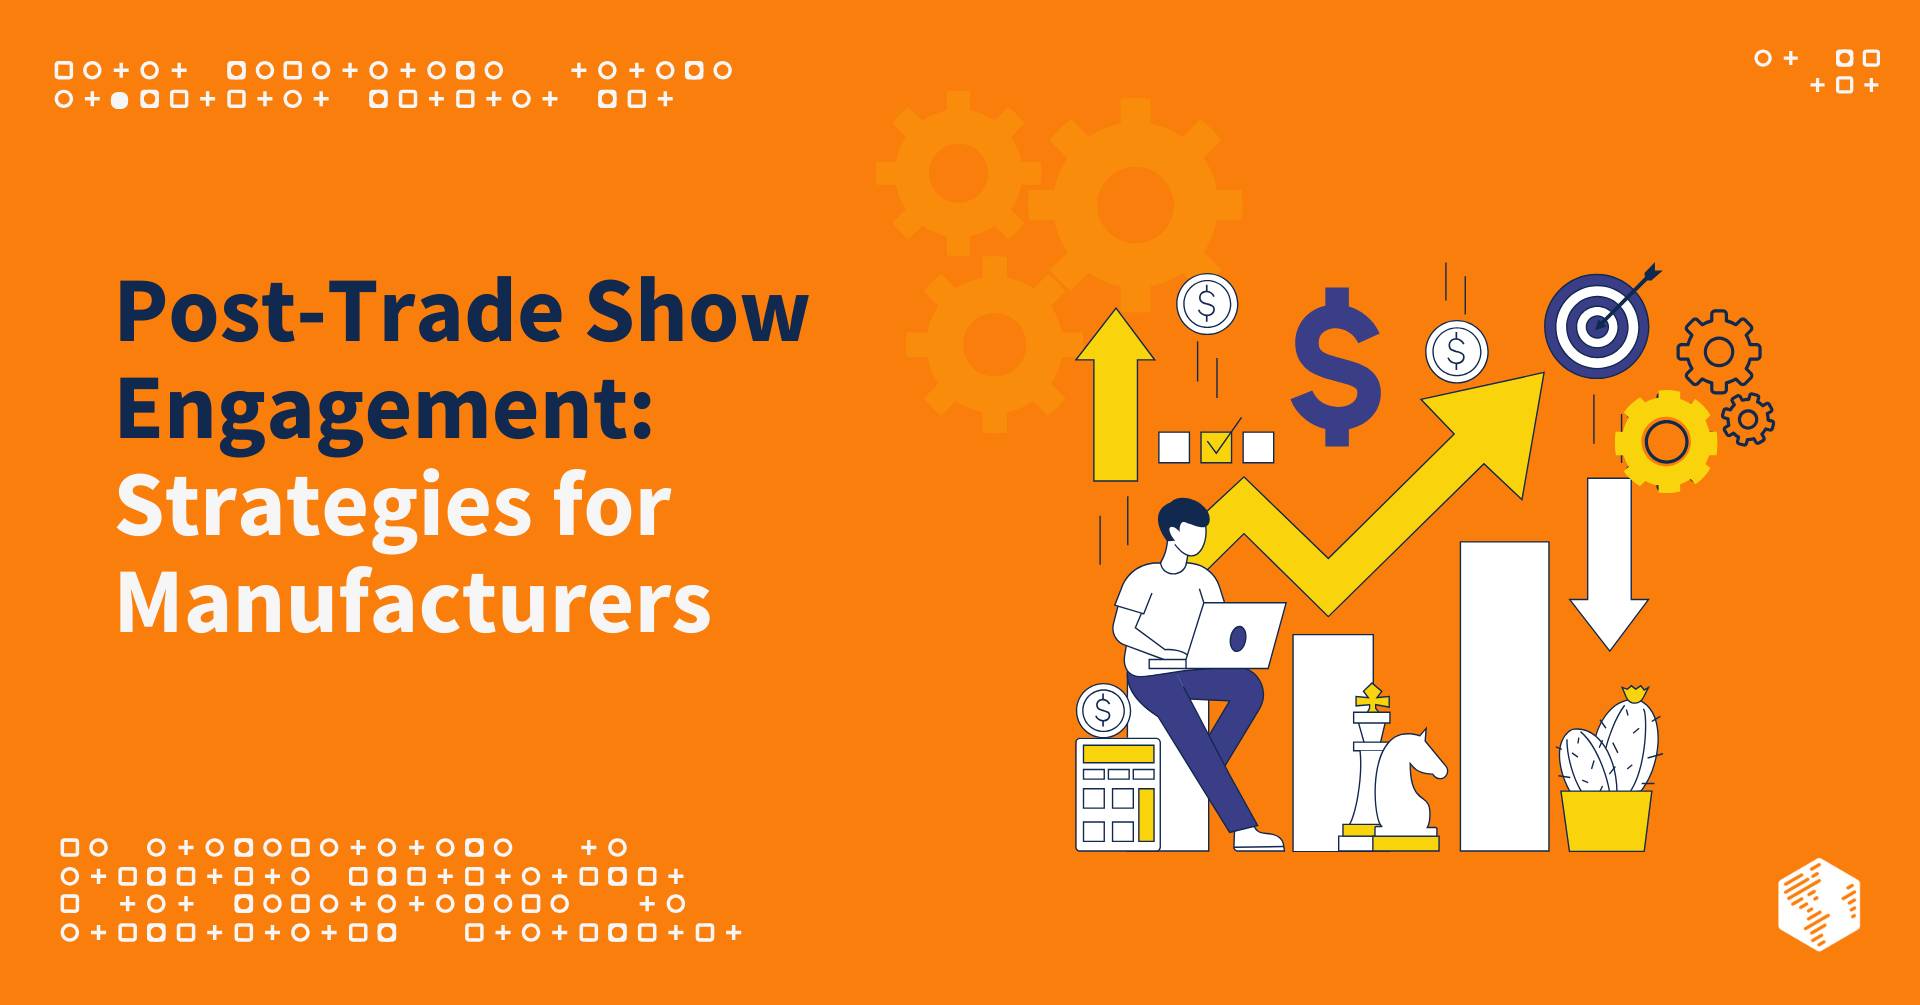 Converting Trade Show Leads: Strategies for Manufacturers